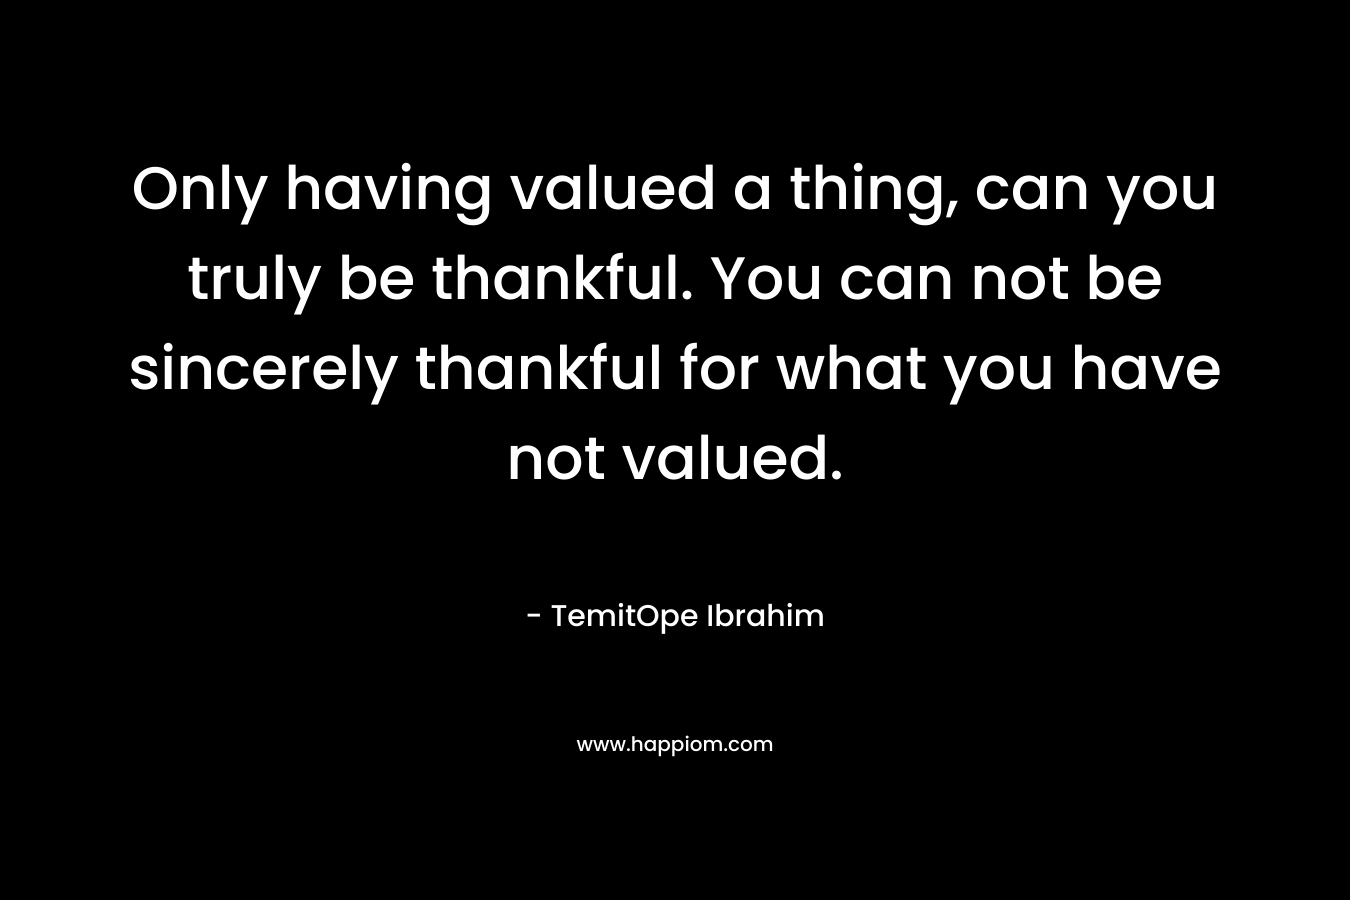 Only having valued a thing, can you truly be thankful. You can not be sincerely thankful for what you have not valued.